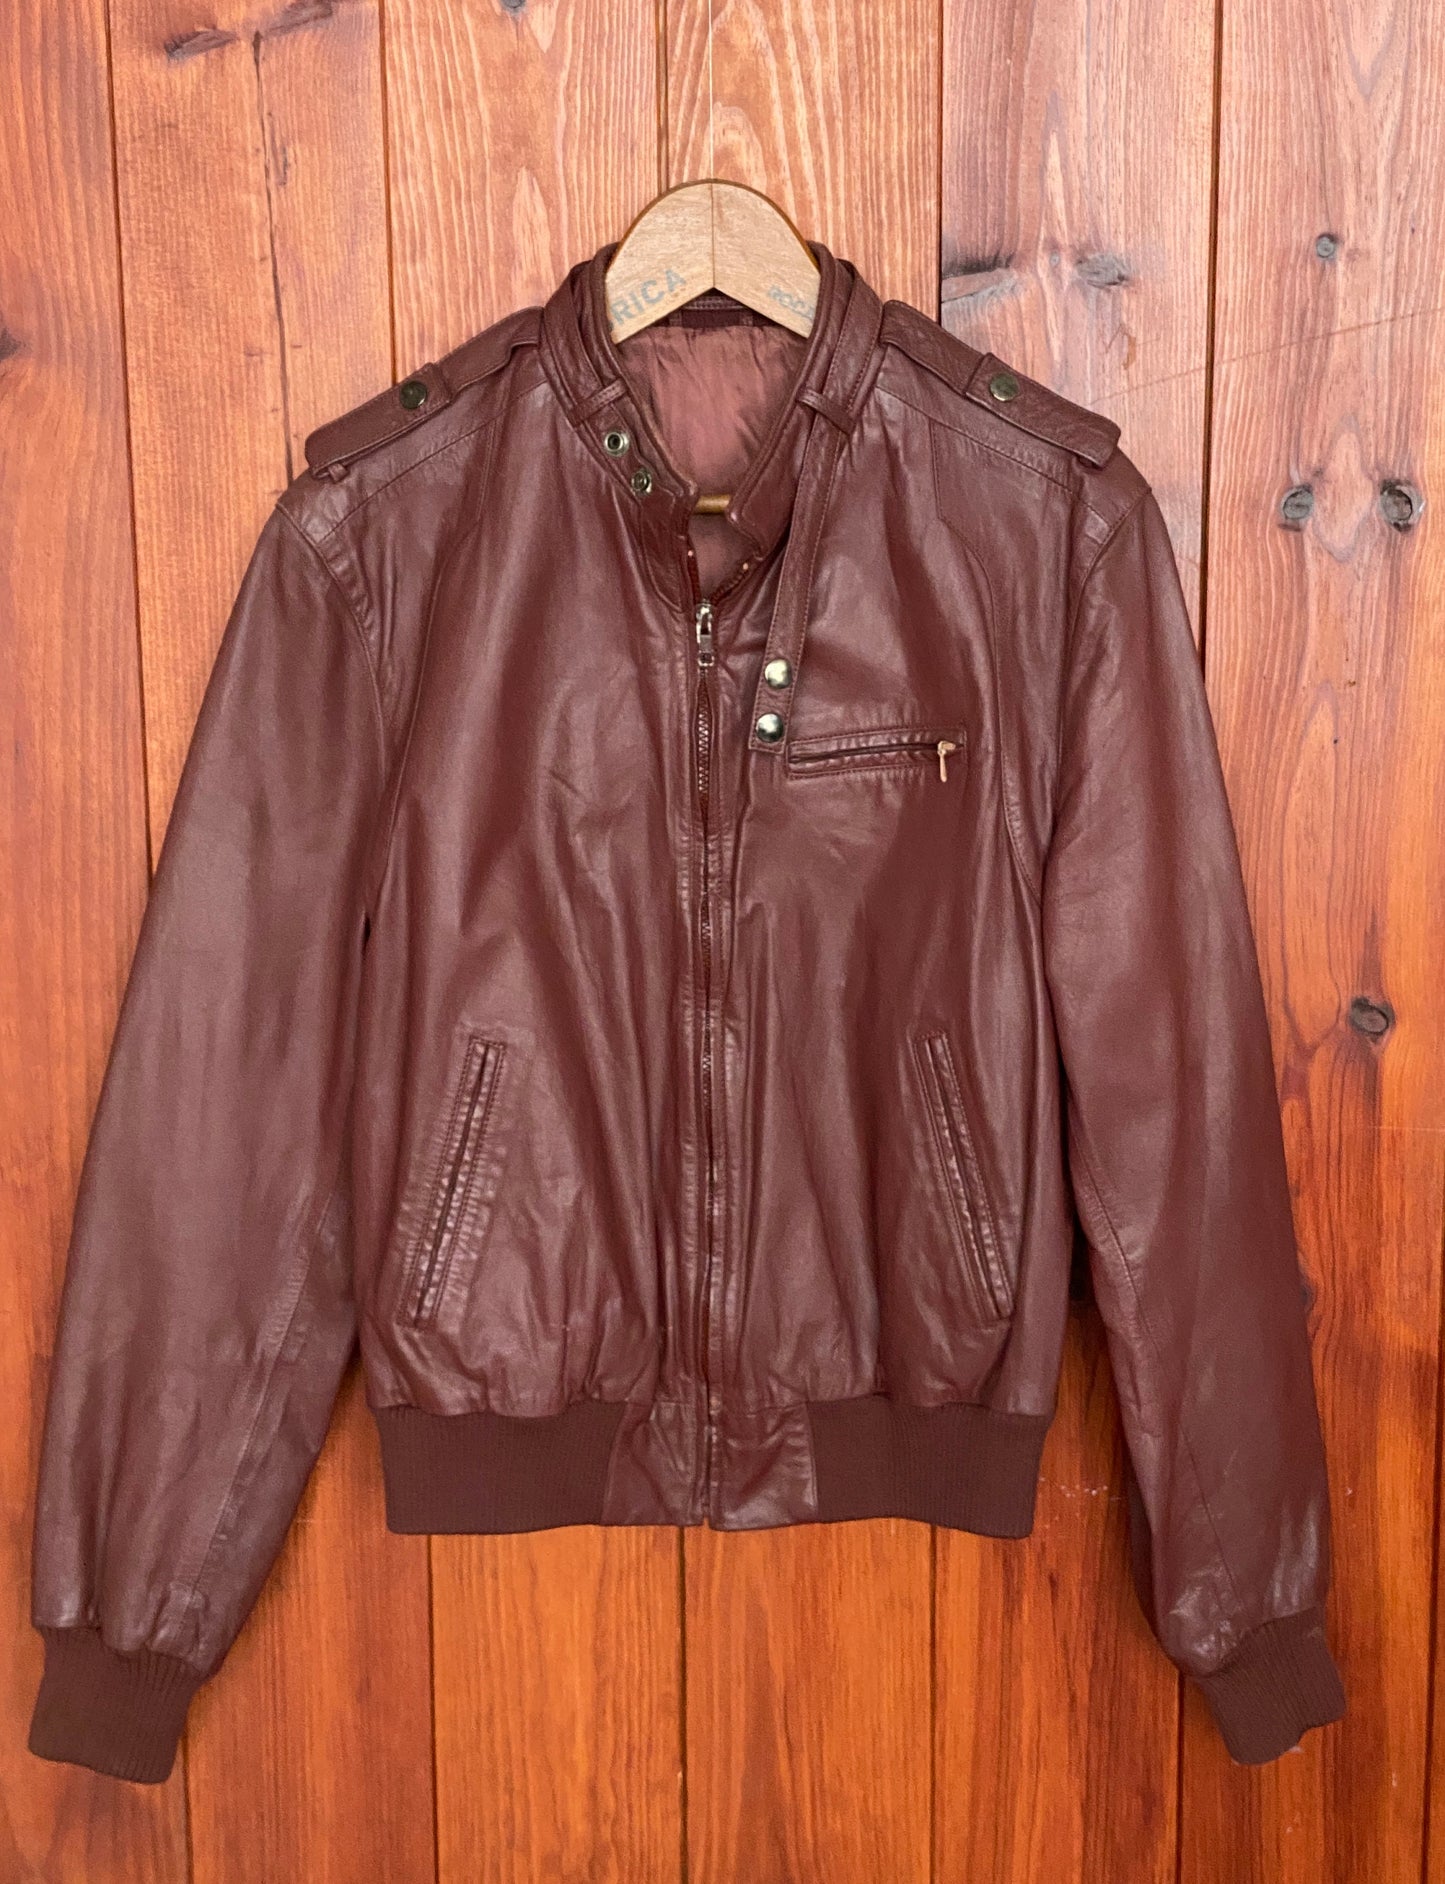 80s Vintage Leather Jacket Members Only Style - Size 42 Long (Fits 50 EU), Made in USA”